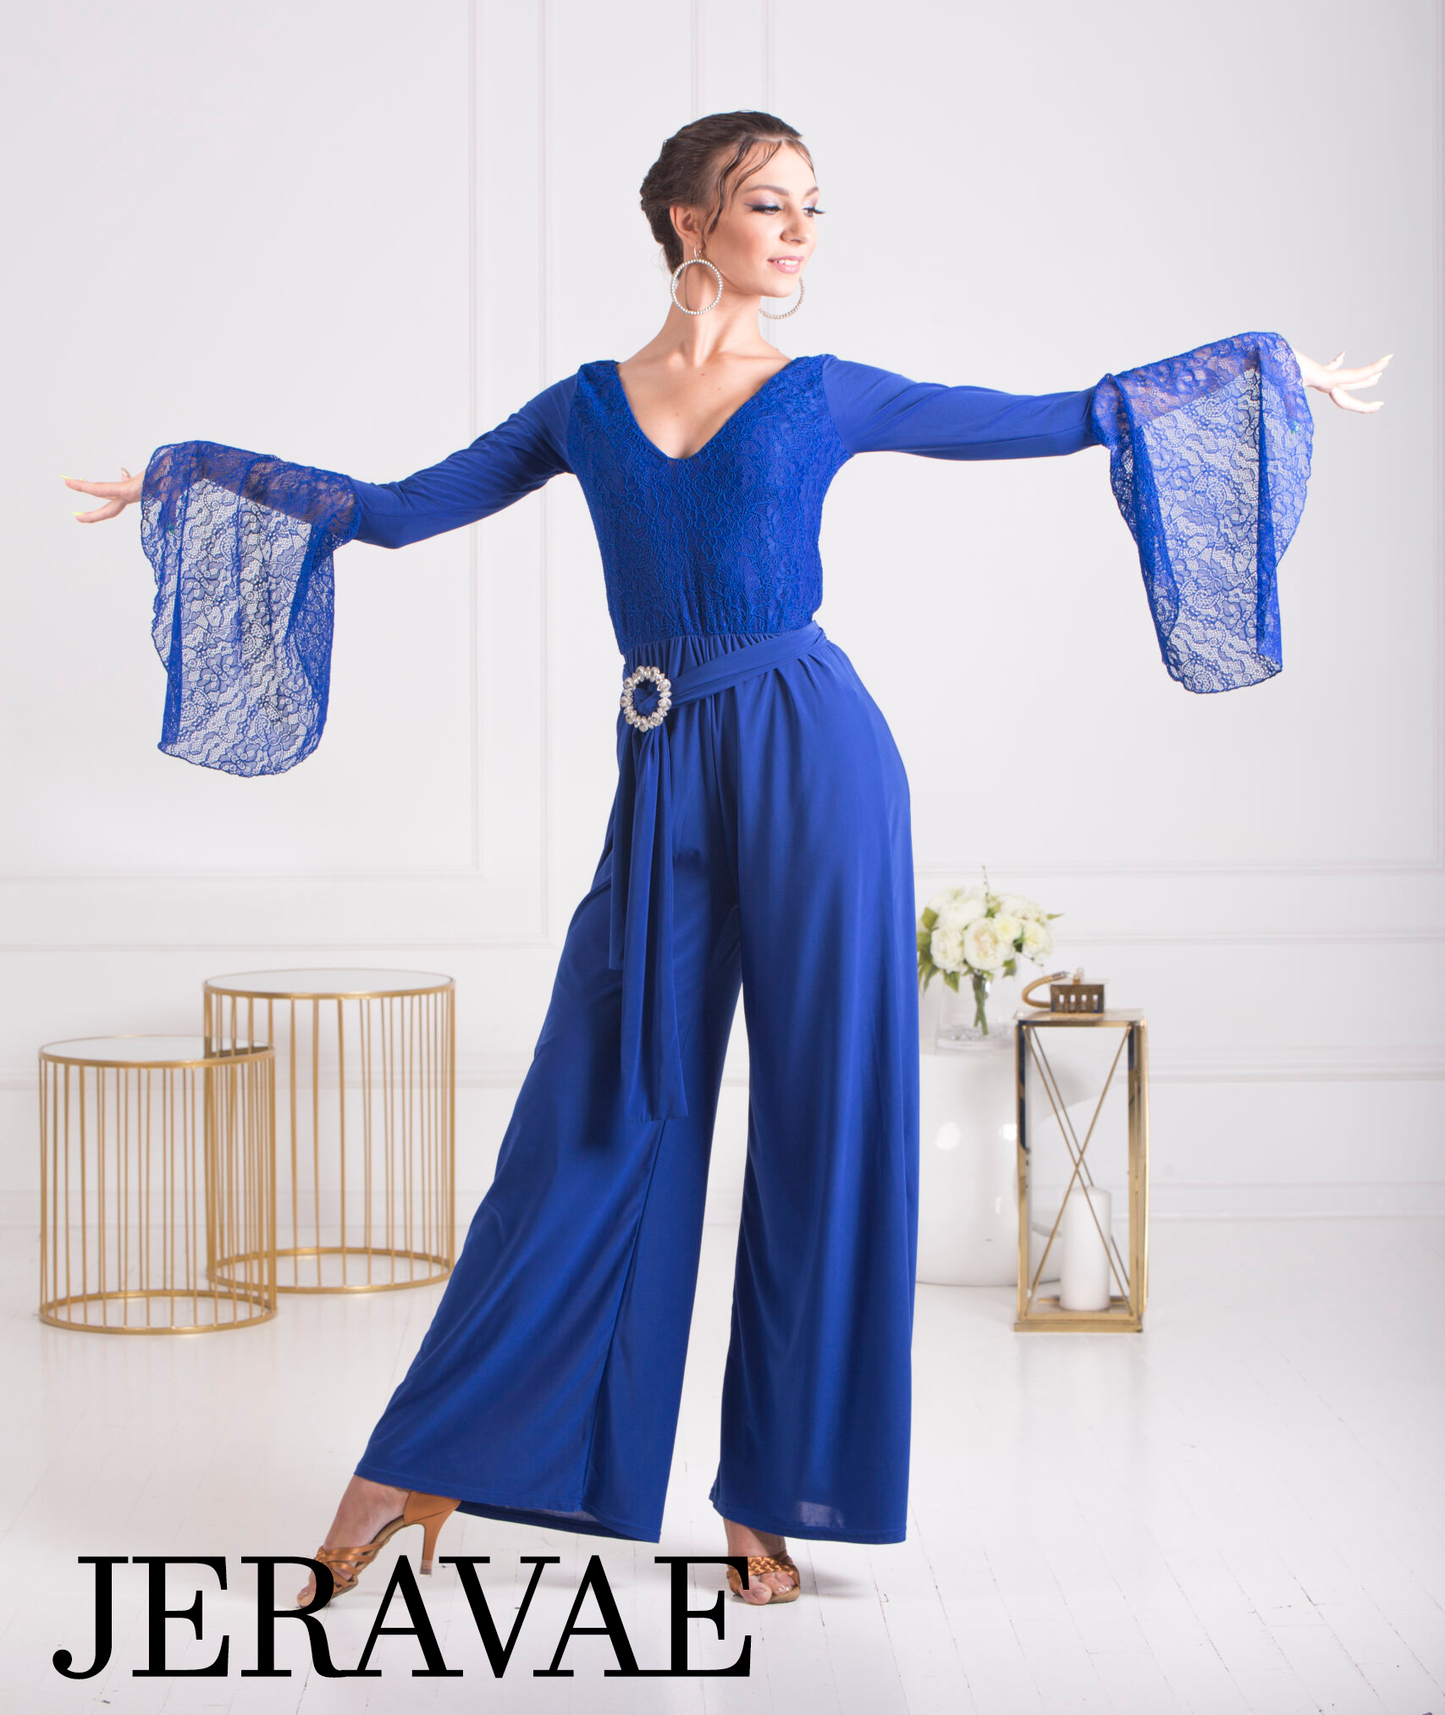 Body Positive Senga Dancewear BLUET Jumpsuit with Wide Legs, Lace Sleeves, and Belt with Elegant Buckle Sizes XL-4XL PRA 1069 in Stock